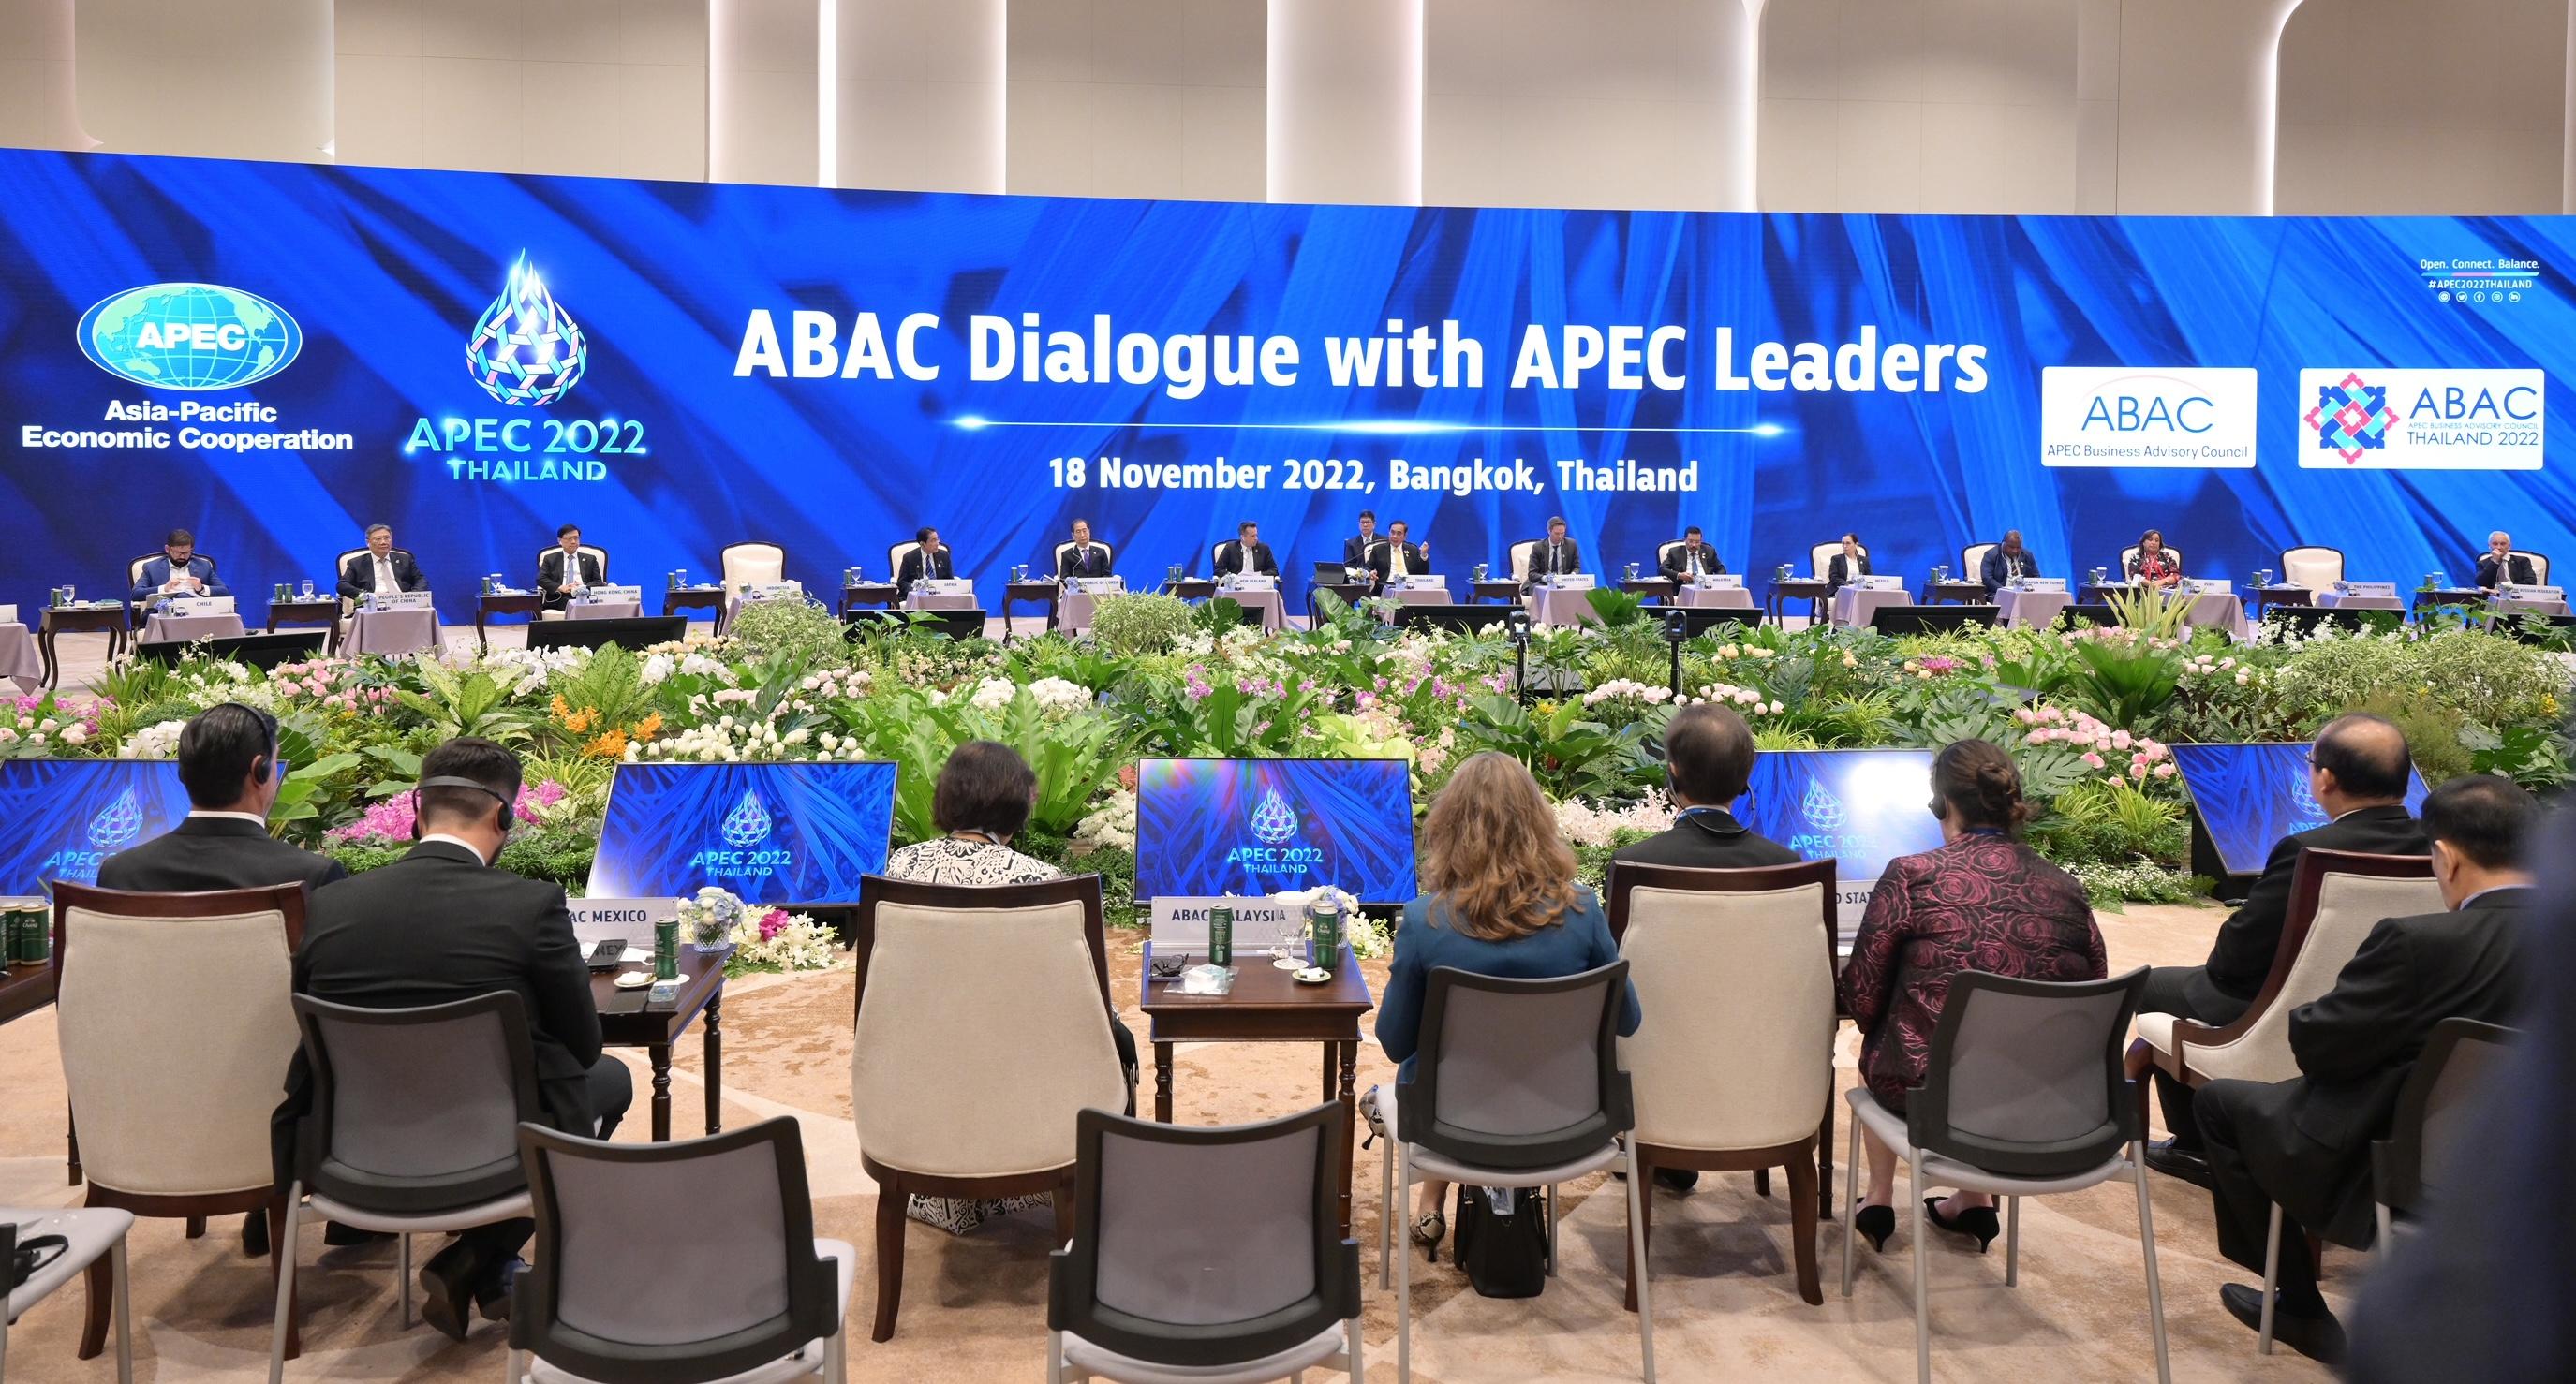 The Chief Executive, Mr John Lee (rear, third left), attends the Asia-Pacific Economic Cooperation (APEC) Leaders' Dialogue with the APEC Business Advisory Council in Bangkok, Thailand, this afternoon (November 18).